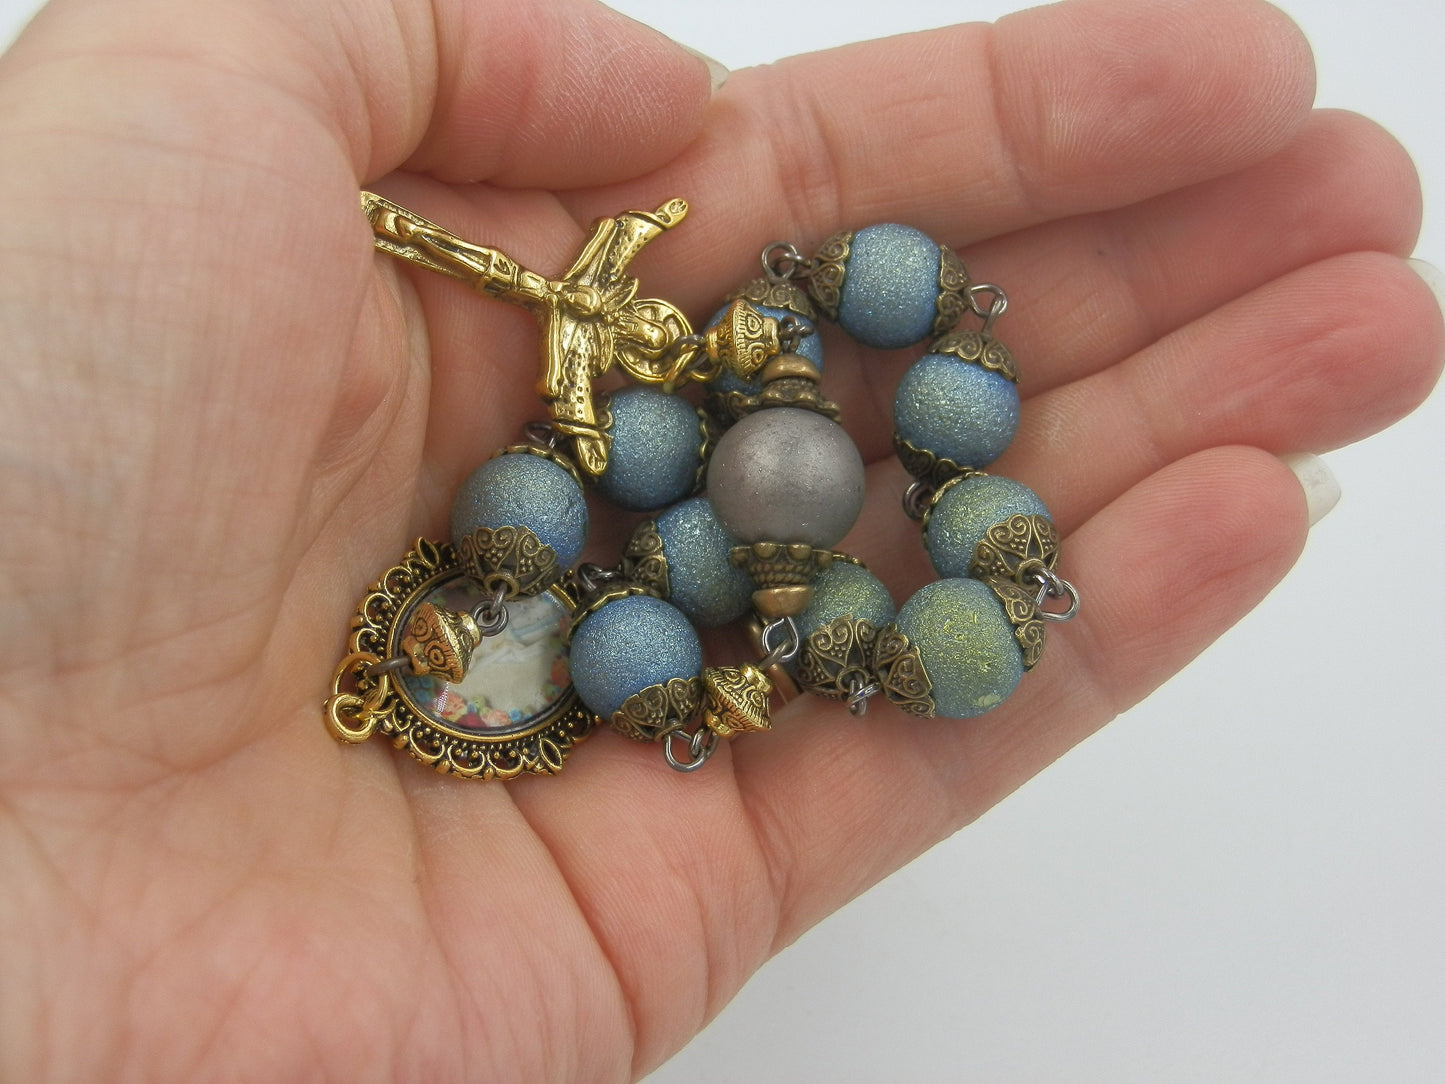 Vintage style Our Lady of Lourdes single decade pocket Rosary beads, The Immaculate Conception medal, Travel beads, Religious prayer beads.